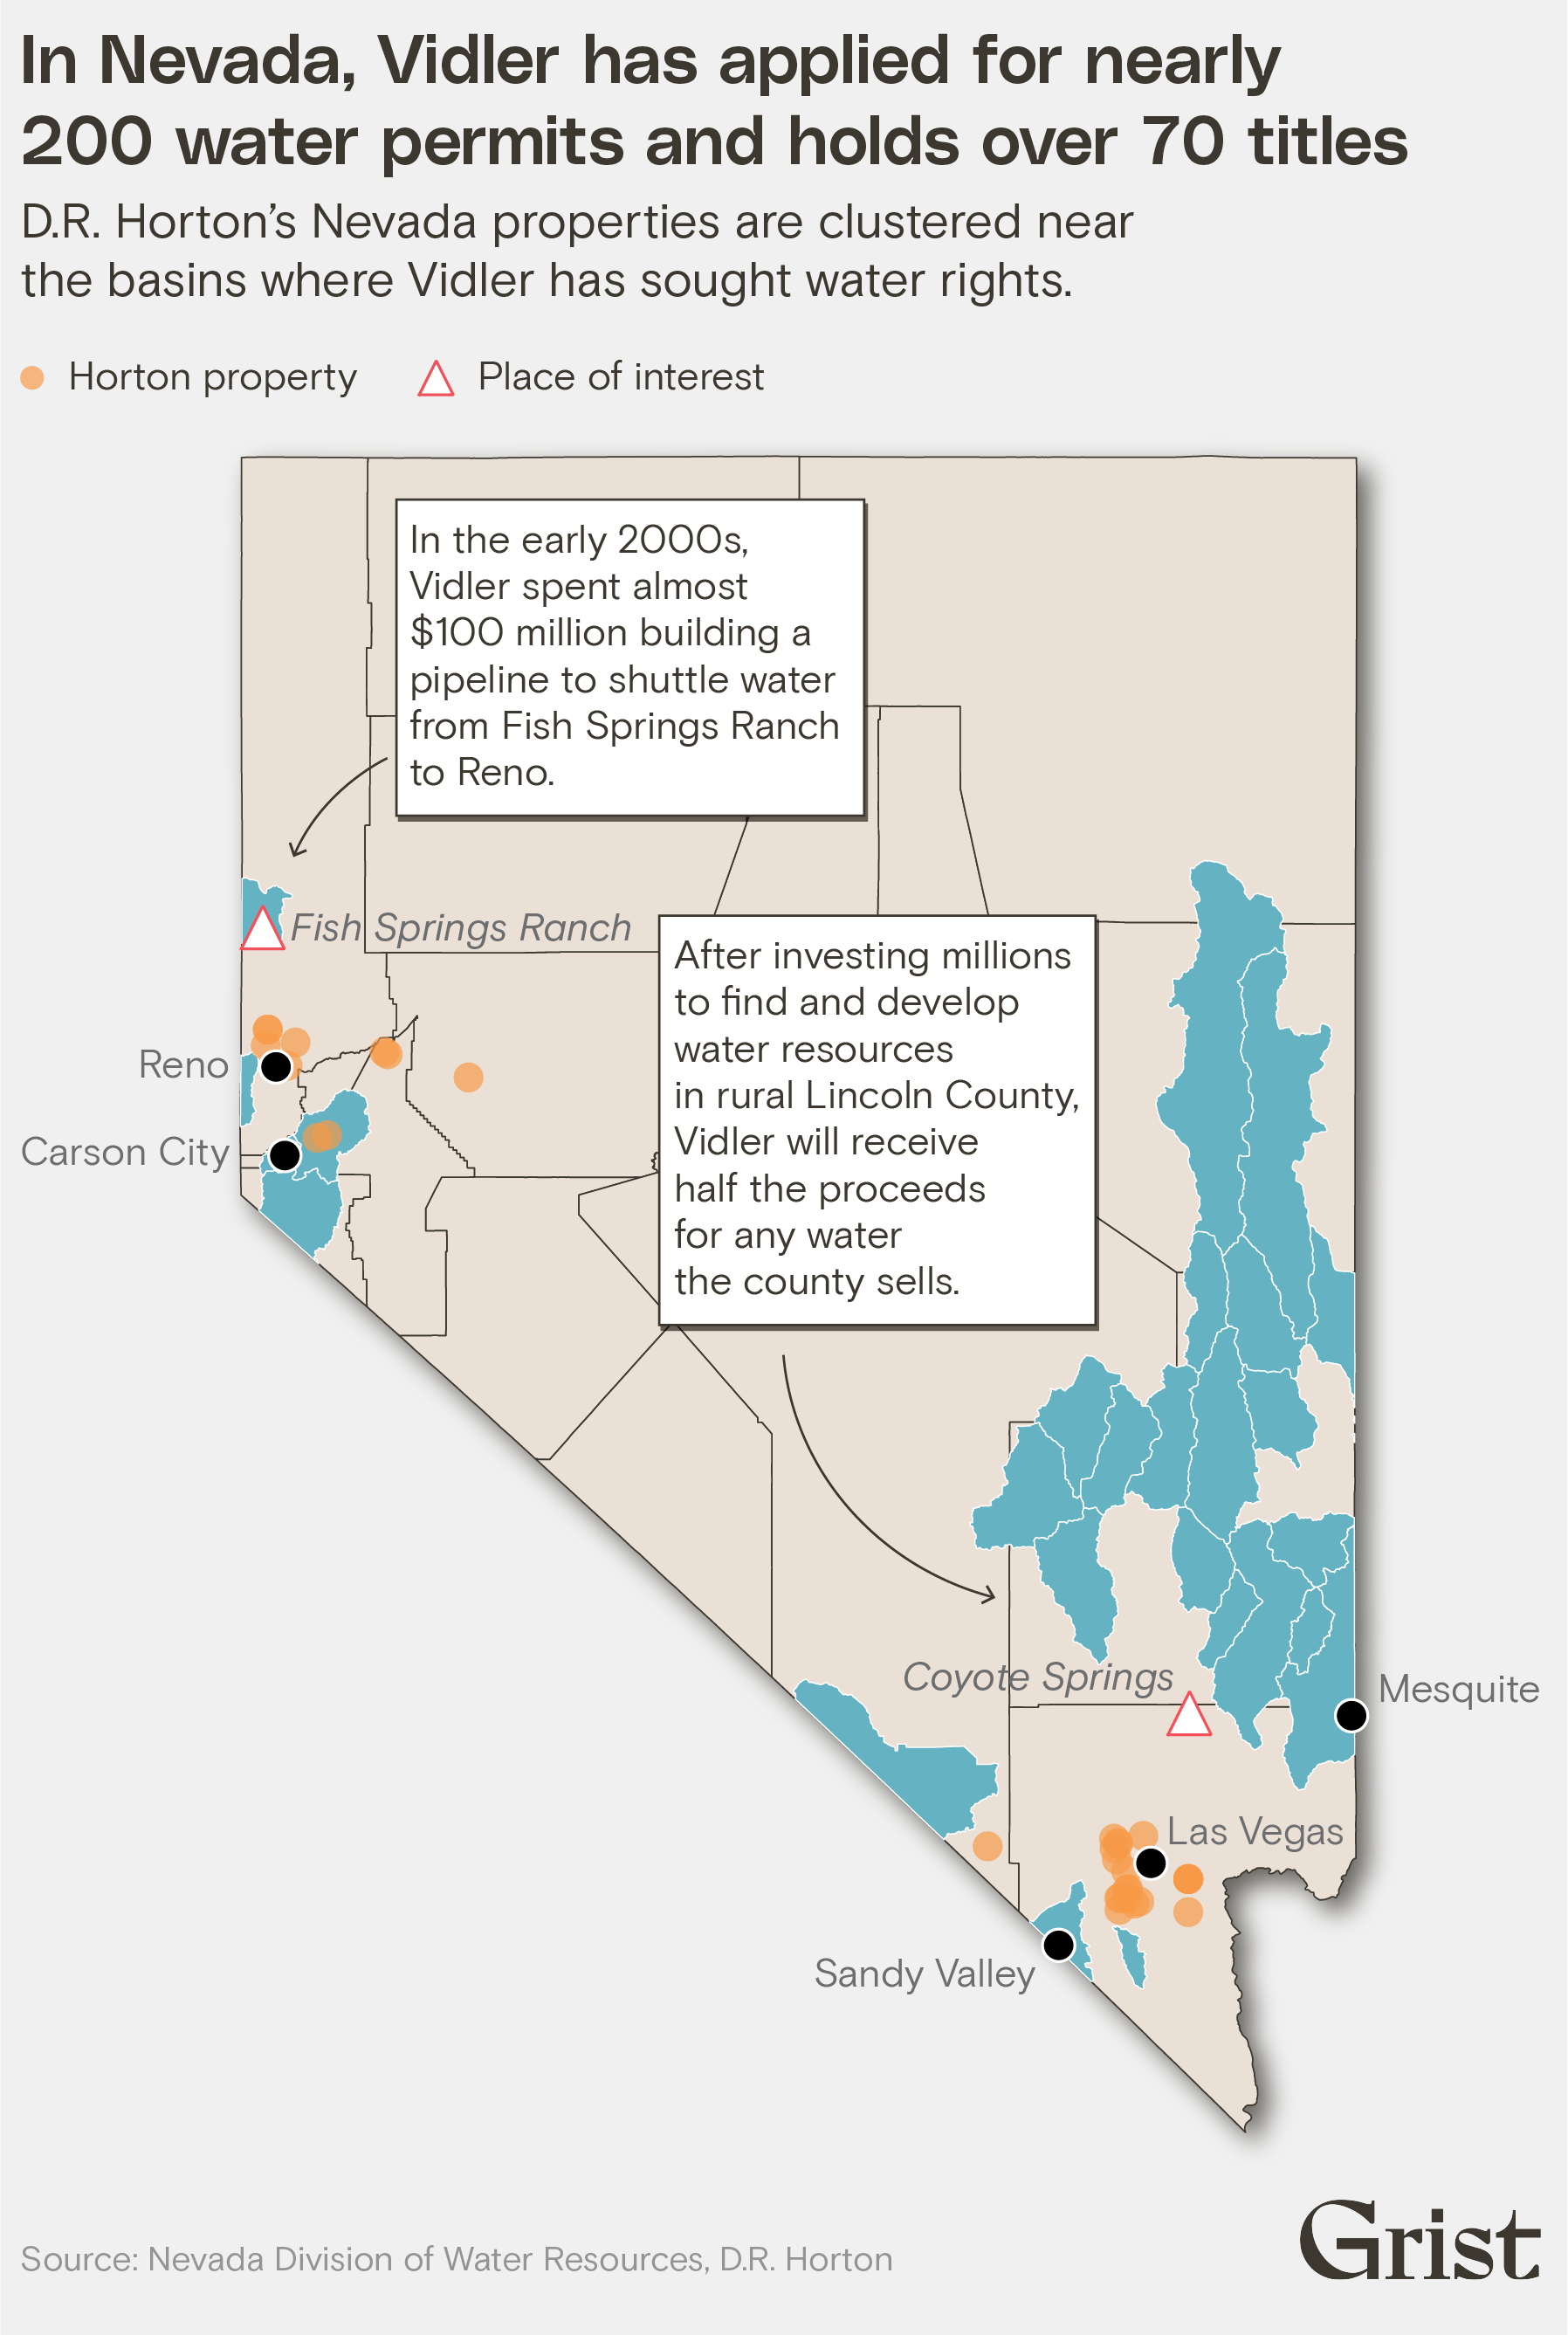 A map showing D.R. Horton's Nevada properties. They are clustered where Vidler has sought water rights. The title reads: 